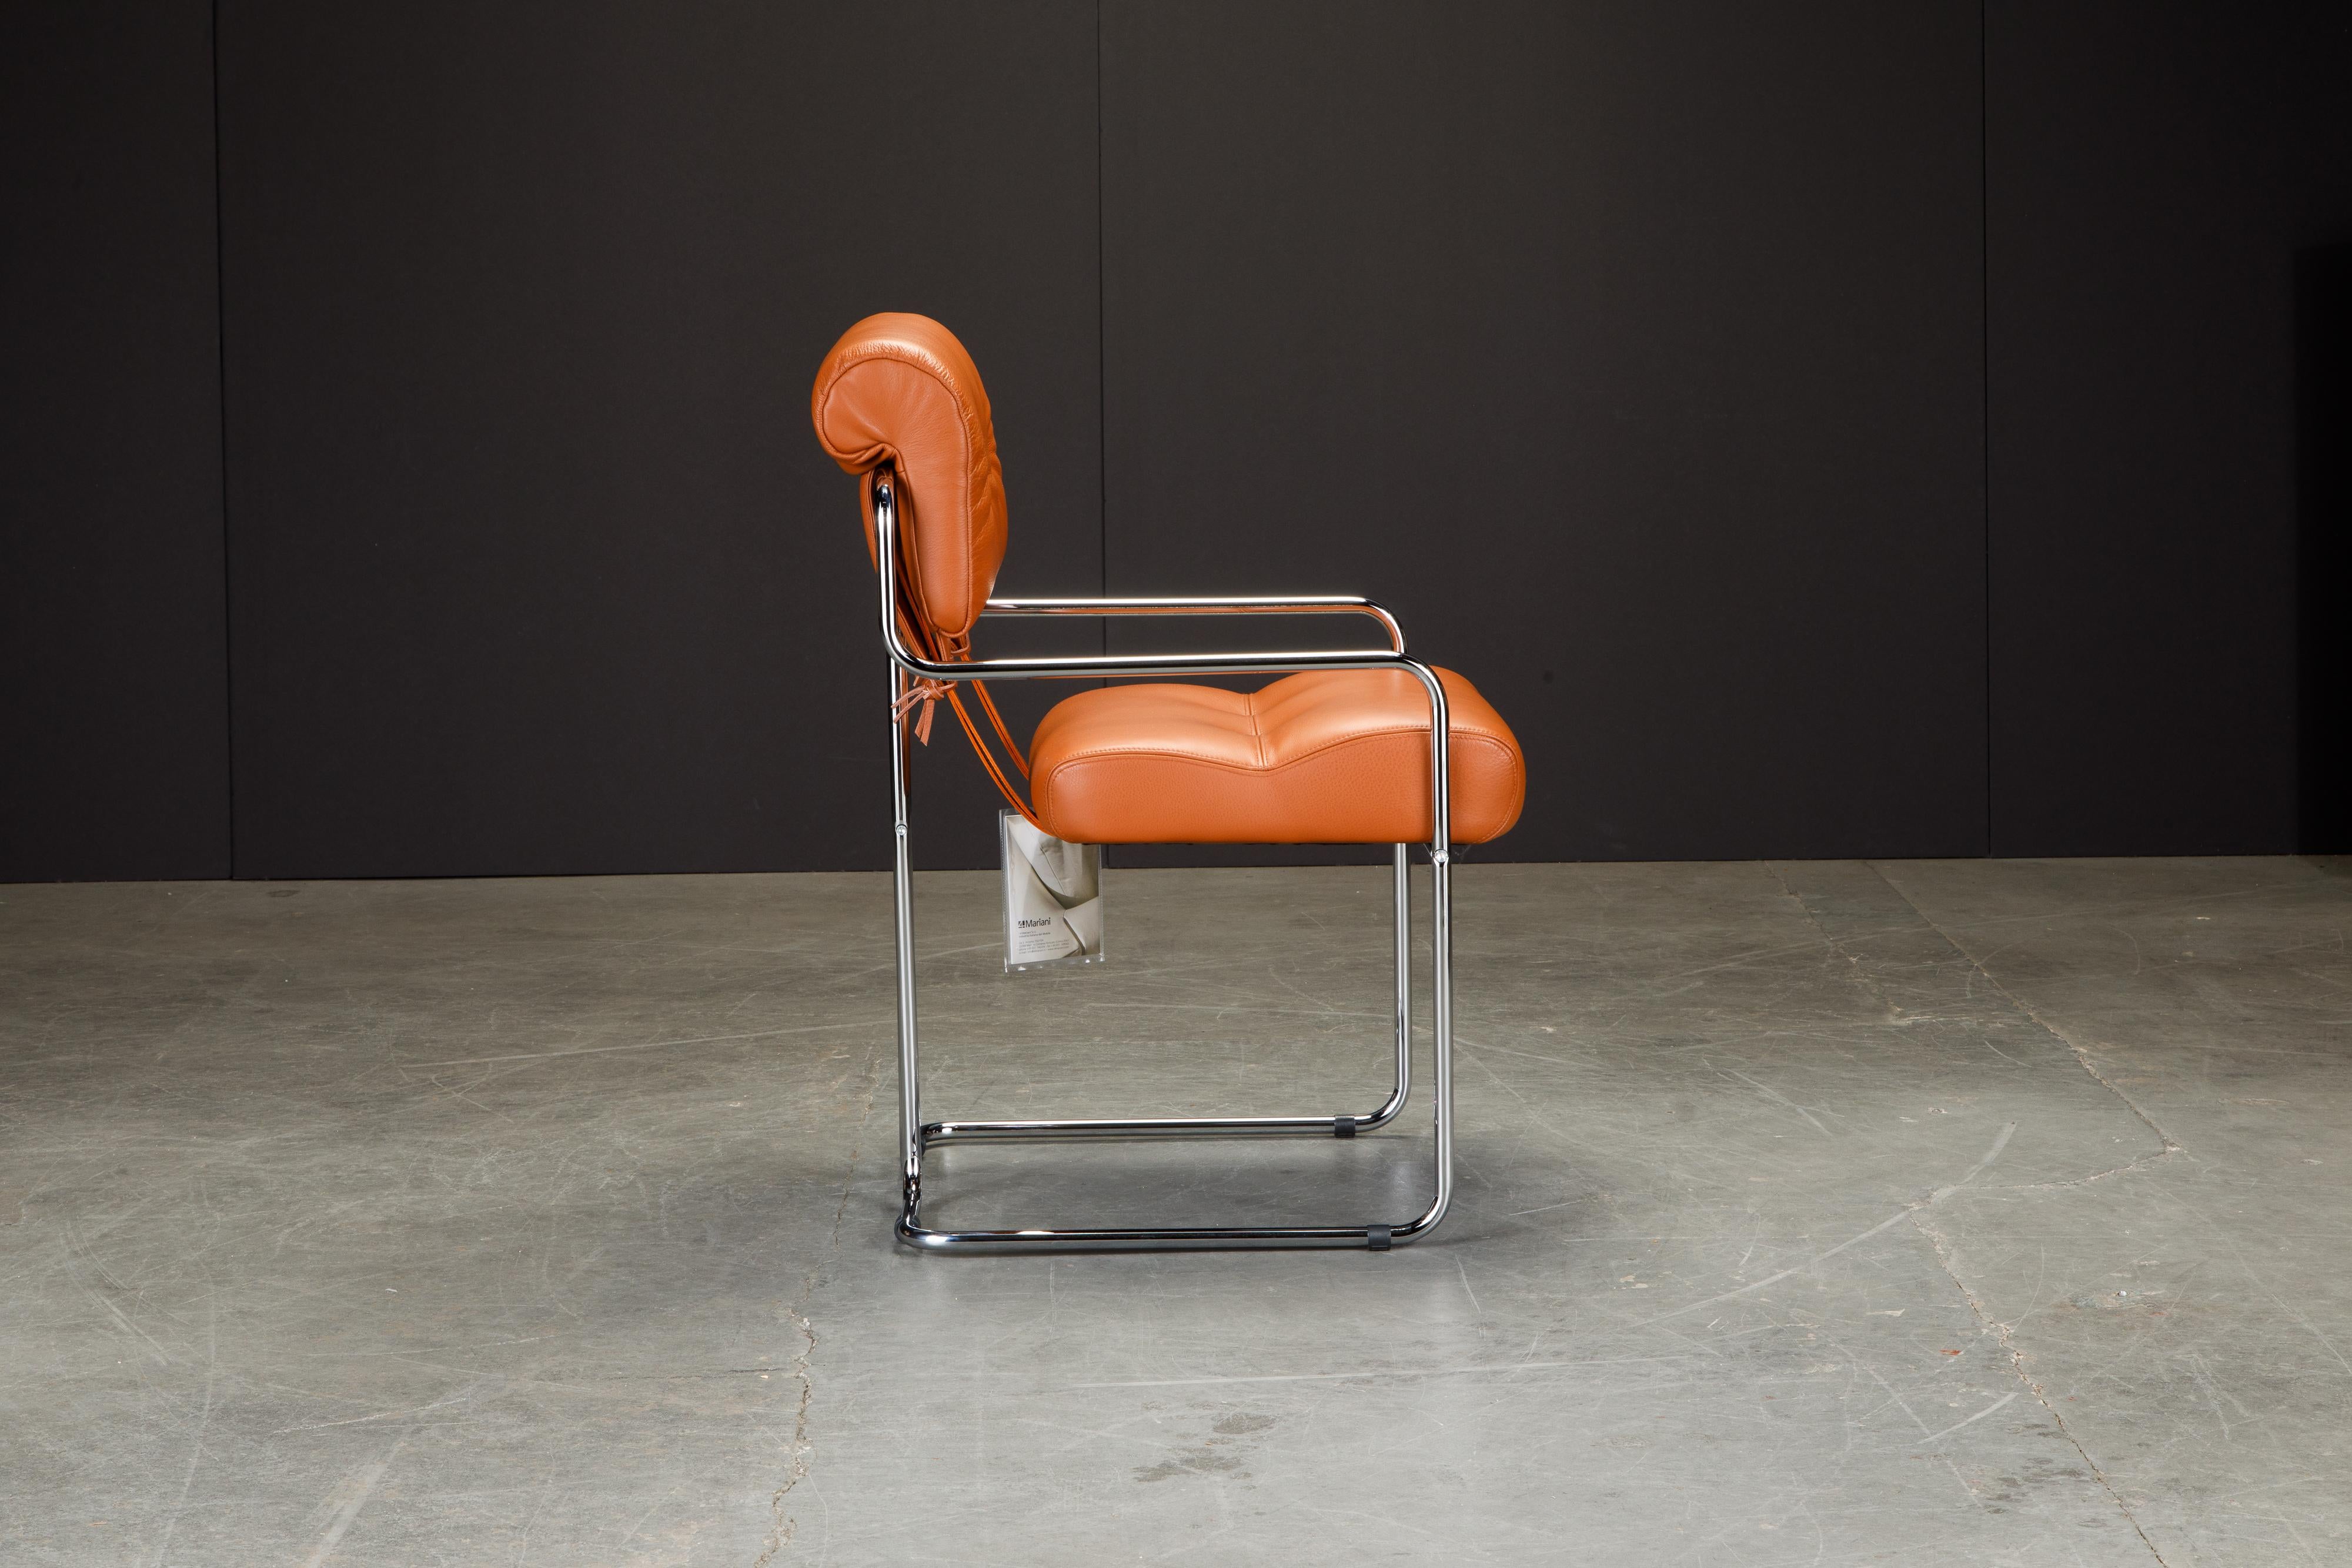 Currently, the most coveted dining chairs by interior designers are 'Tucroma' chairs by Guido Faleschini for i4 Mariani, and we have this brand new pair in beautiful orange leather with polished chrome frames. The seats and backs have supple orange